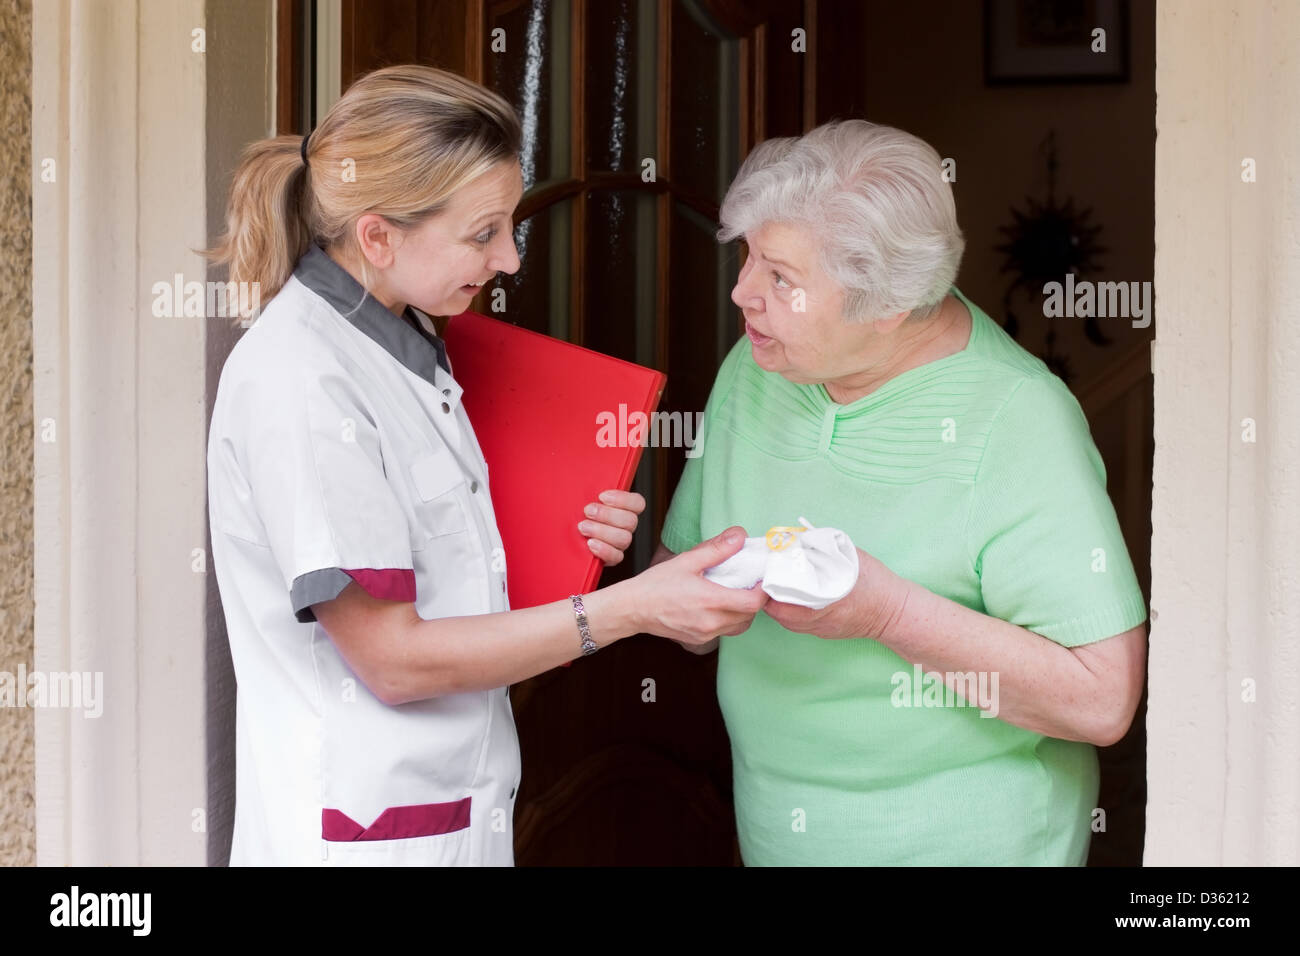 nurse greeted with her patient Stock Photo